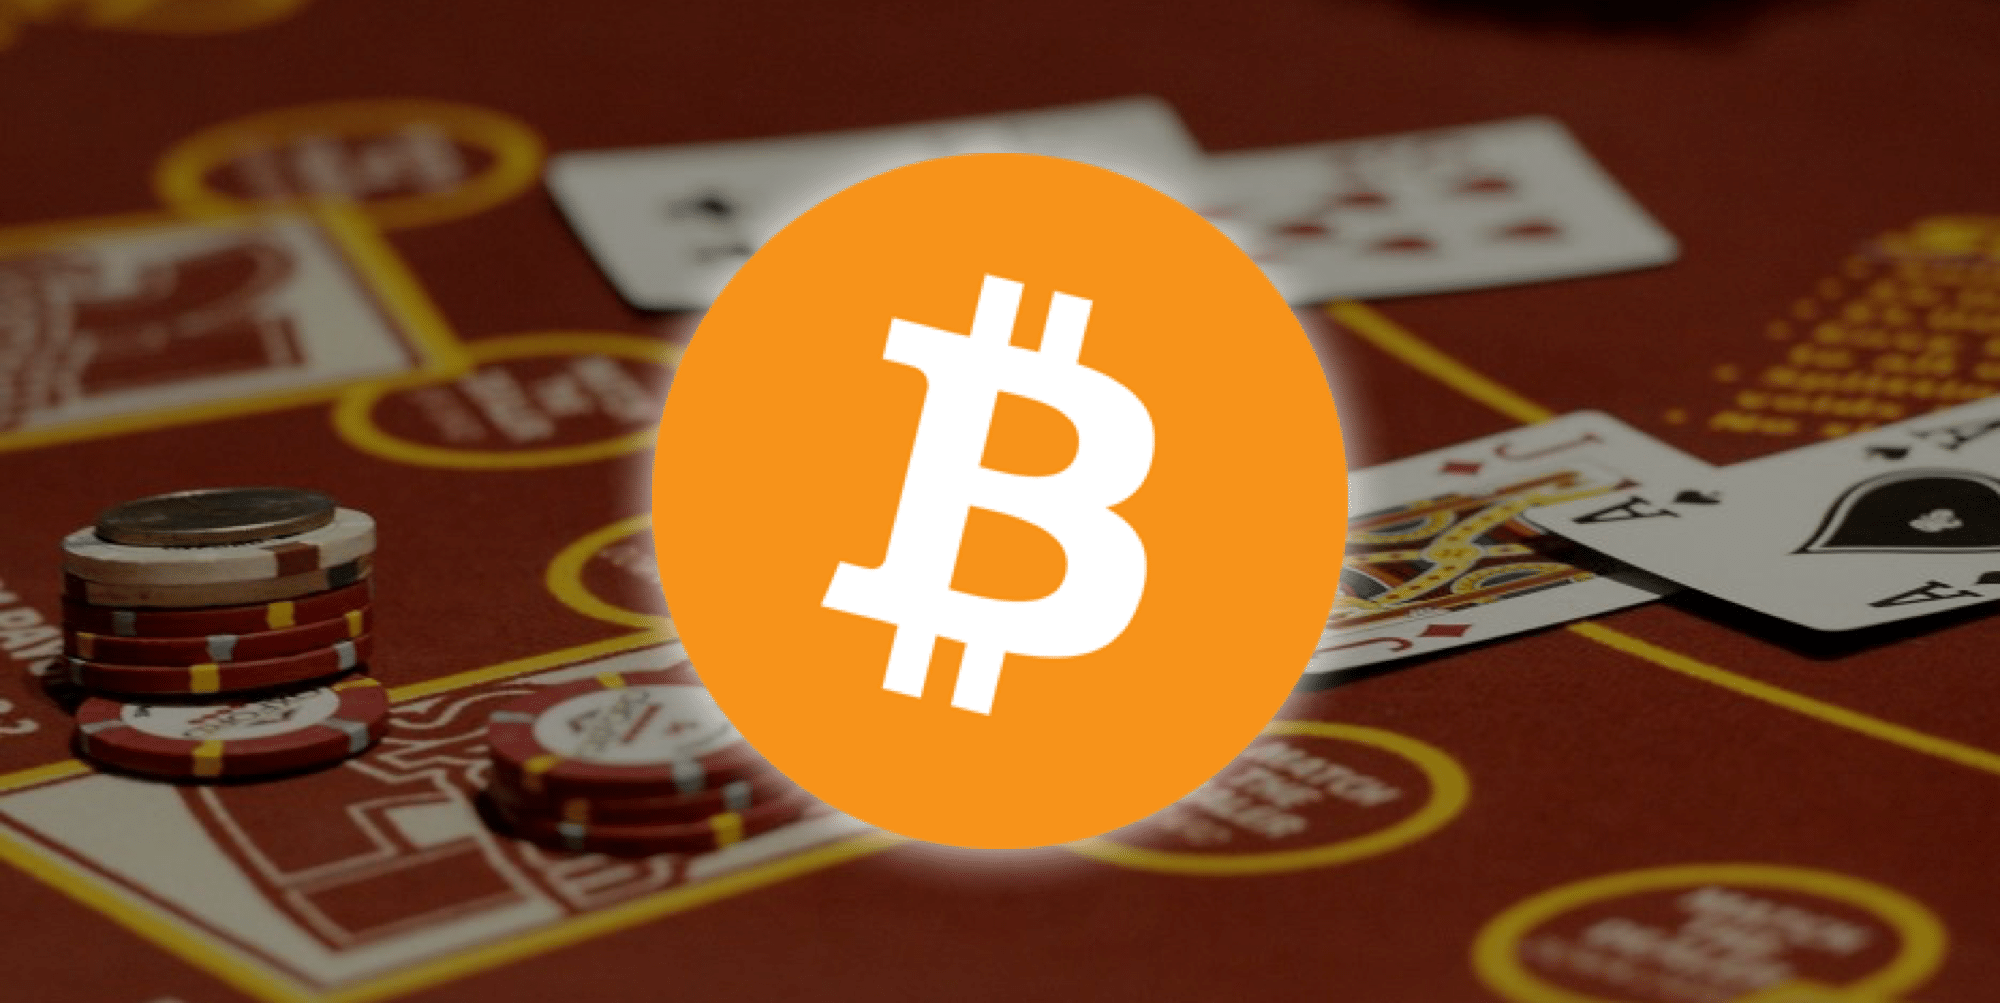 cryptocurrency casino Consulting – What The Heck Is That?